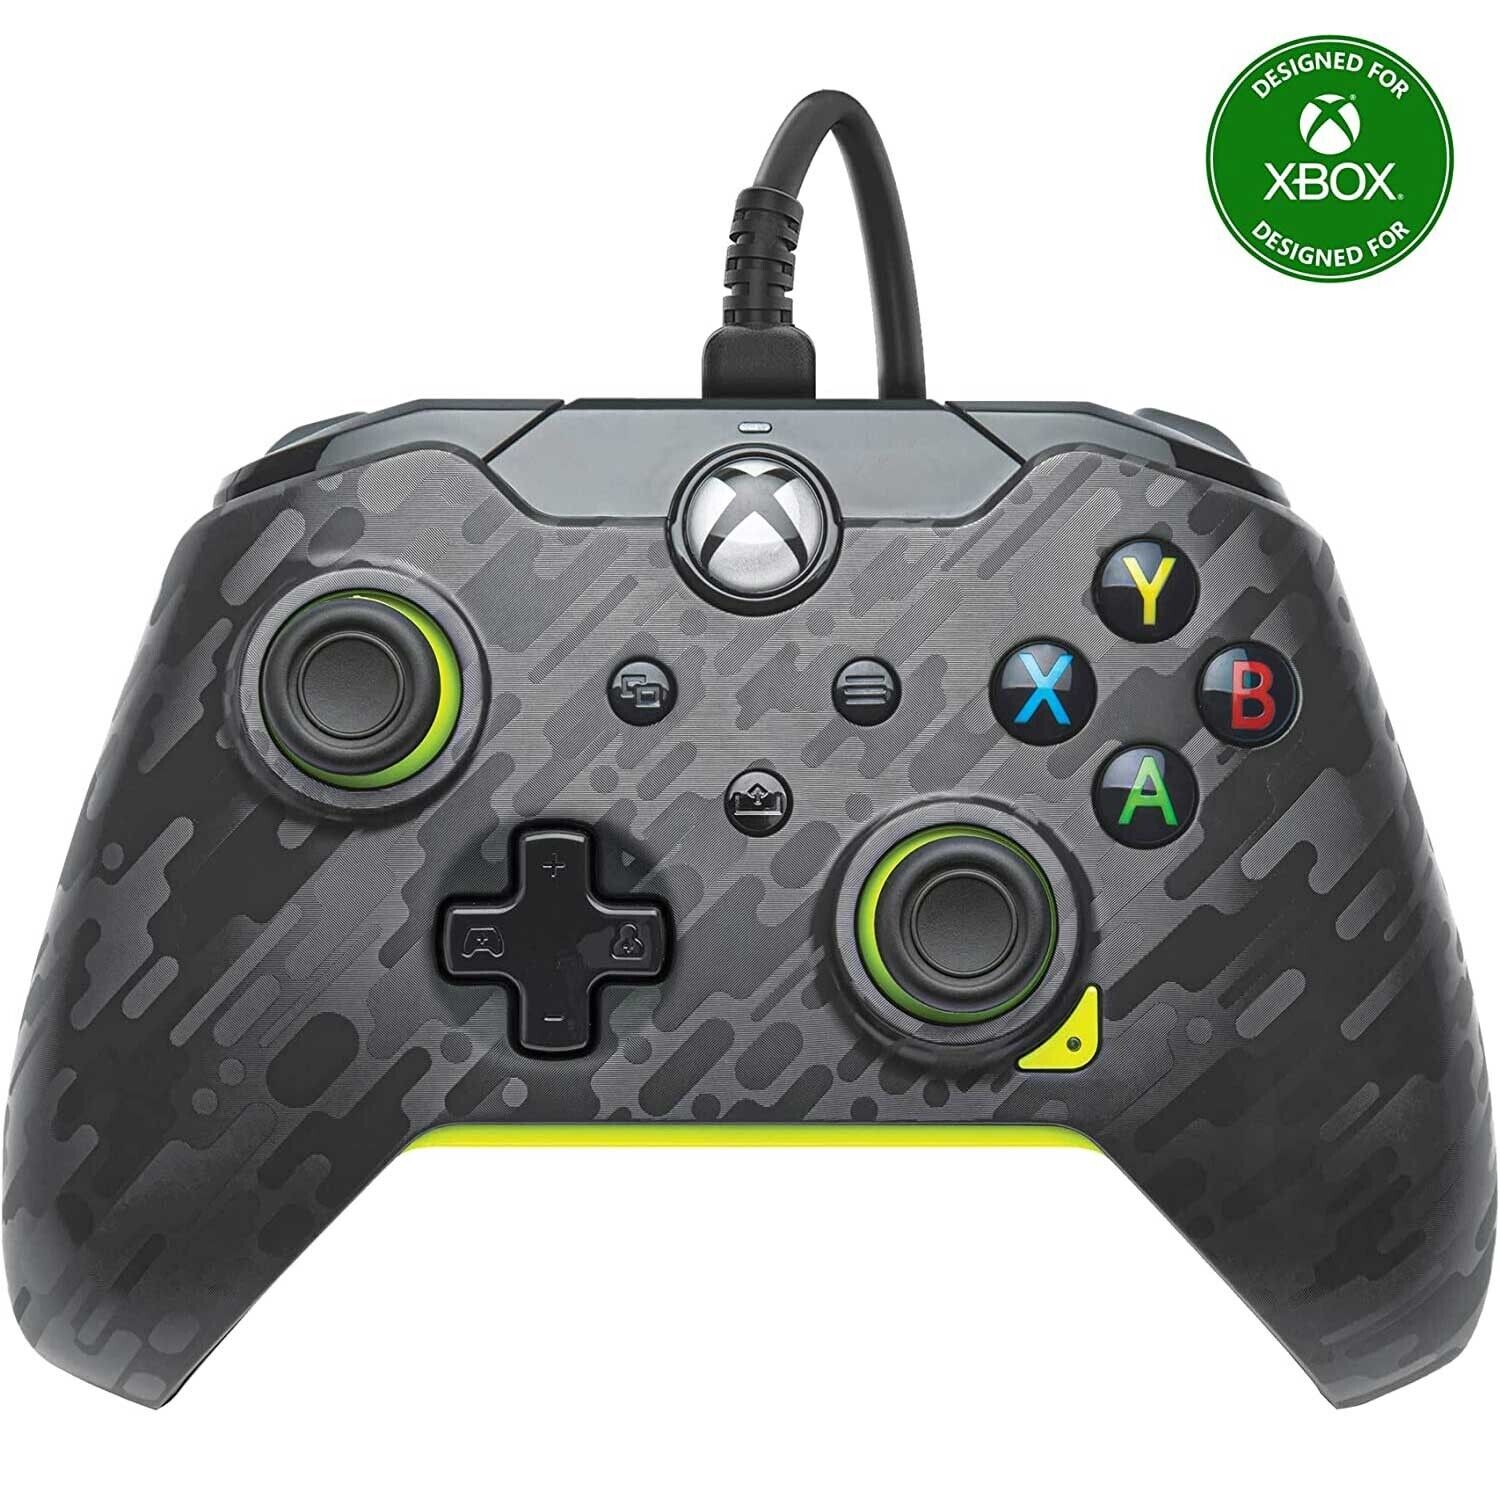 USB WIRED CONTROLLER FOR MICROSOFT XBOX ONE X SERIES S PC LAPTOP BLACK NEW